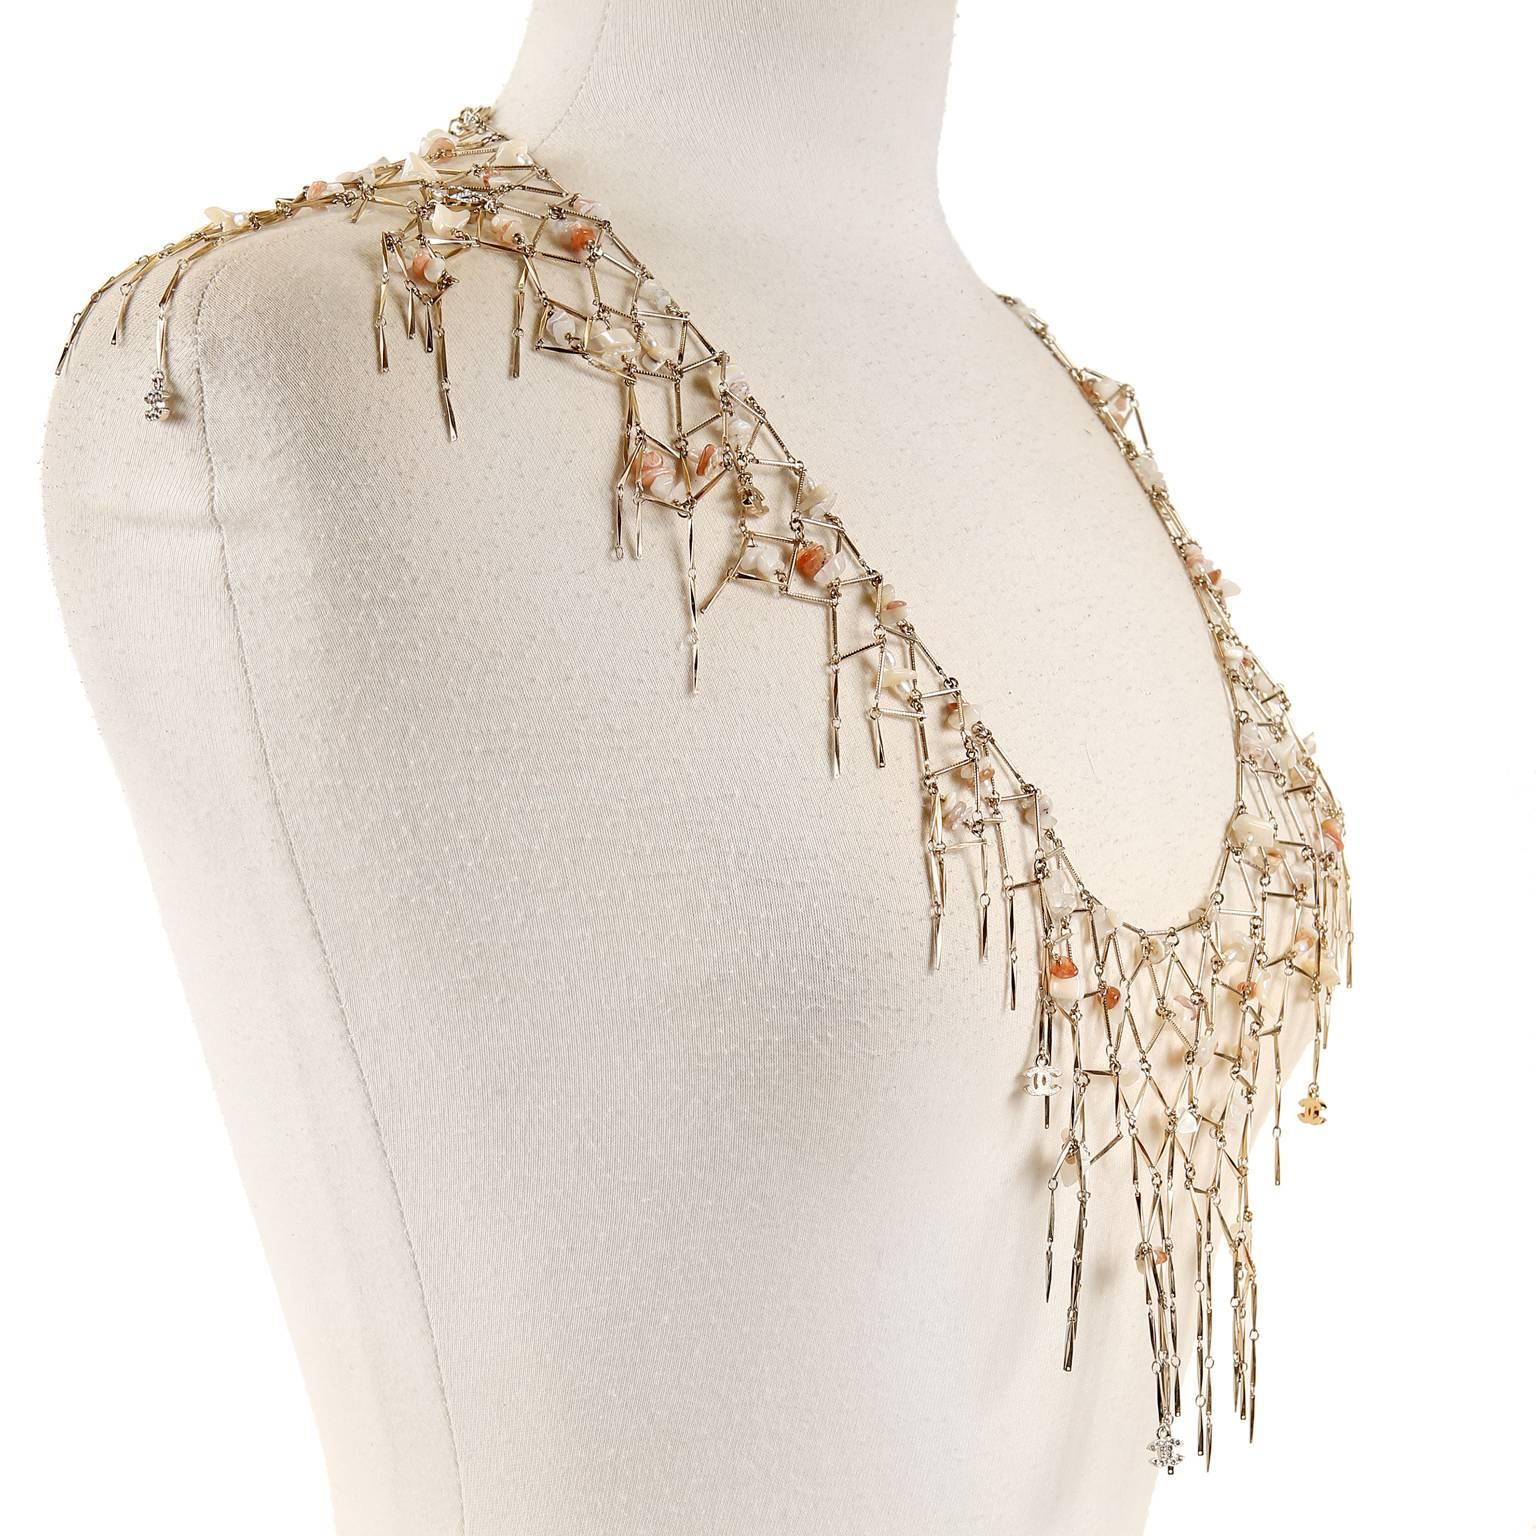 Chanel Gold Net Dripping Chain Necklace In Excellent Condition For Sale In Malibu, CA